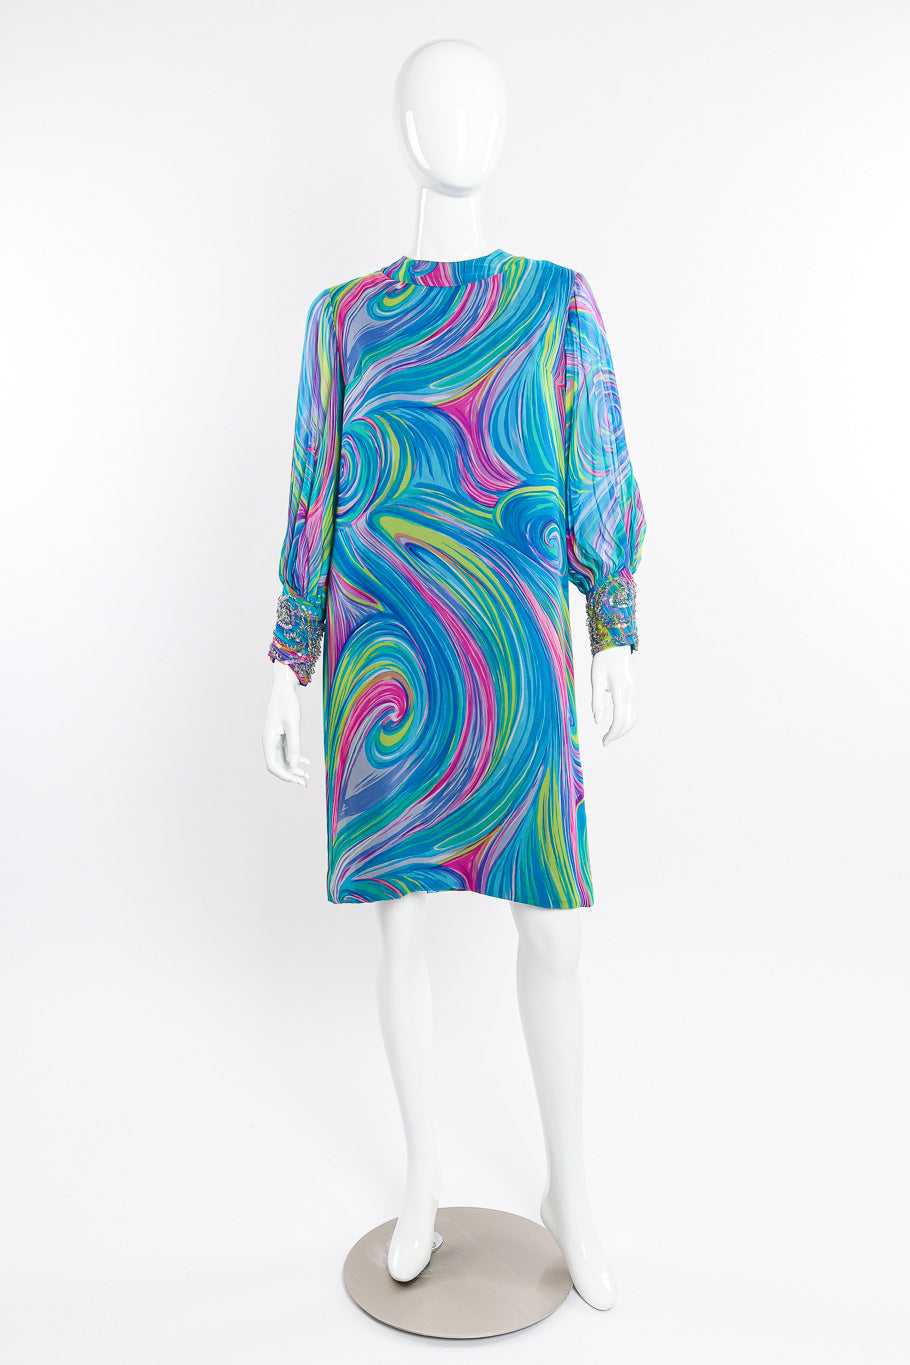 Vintage Mr. Frank Abstract Swirl Silk Dress front view on mannequin @Recessla